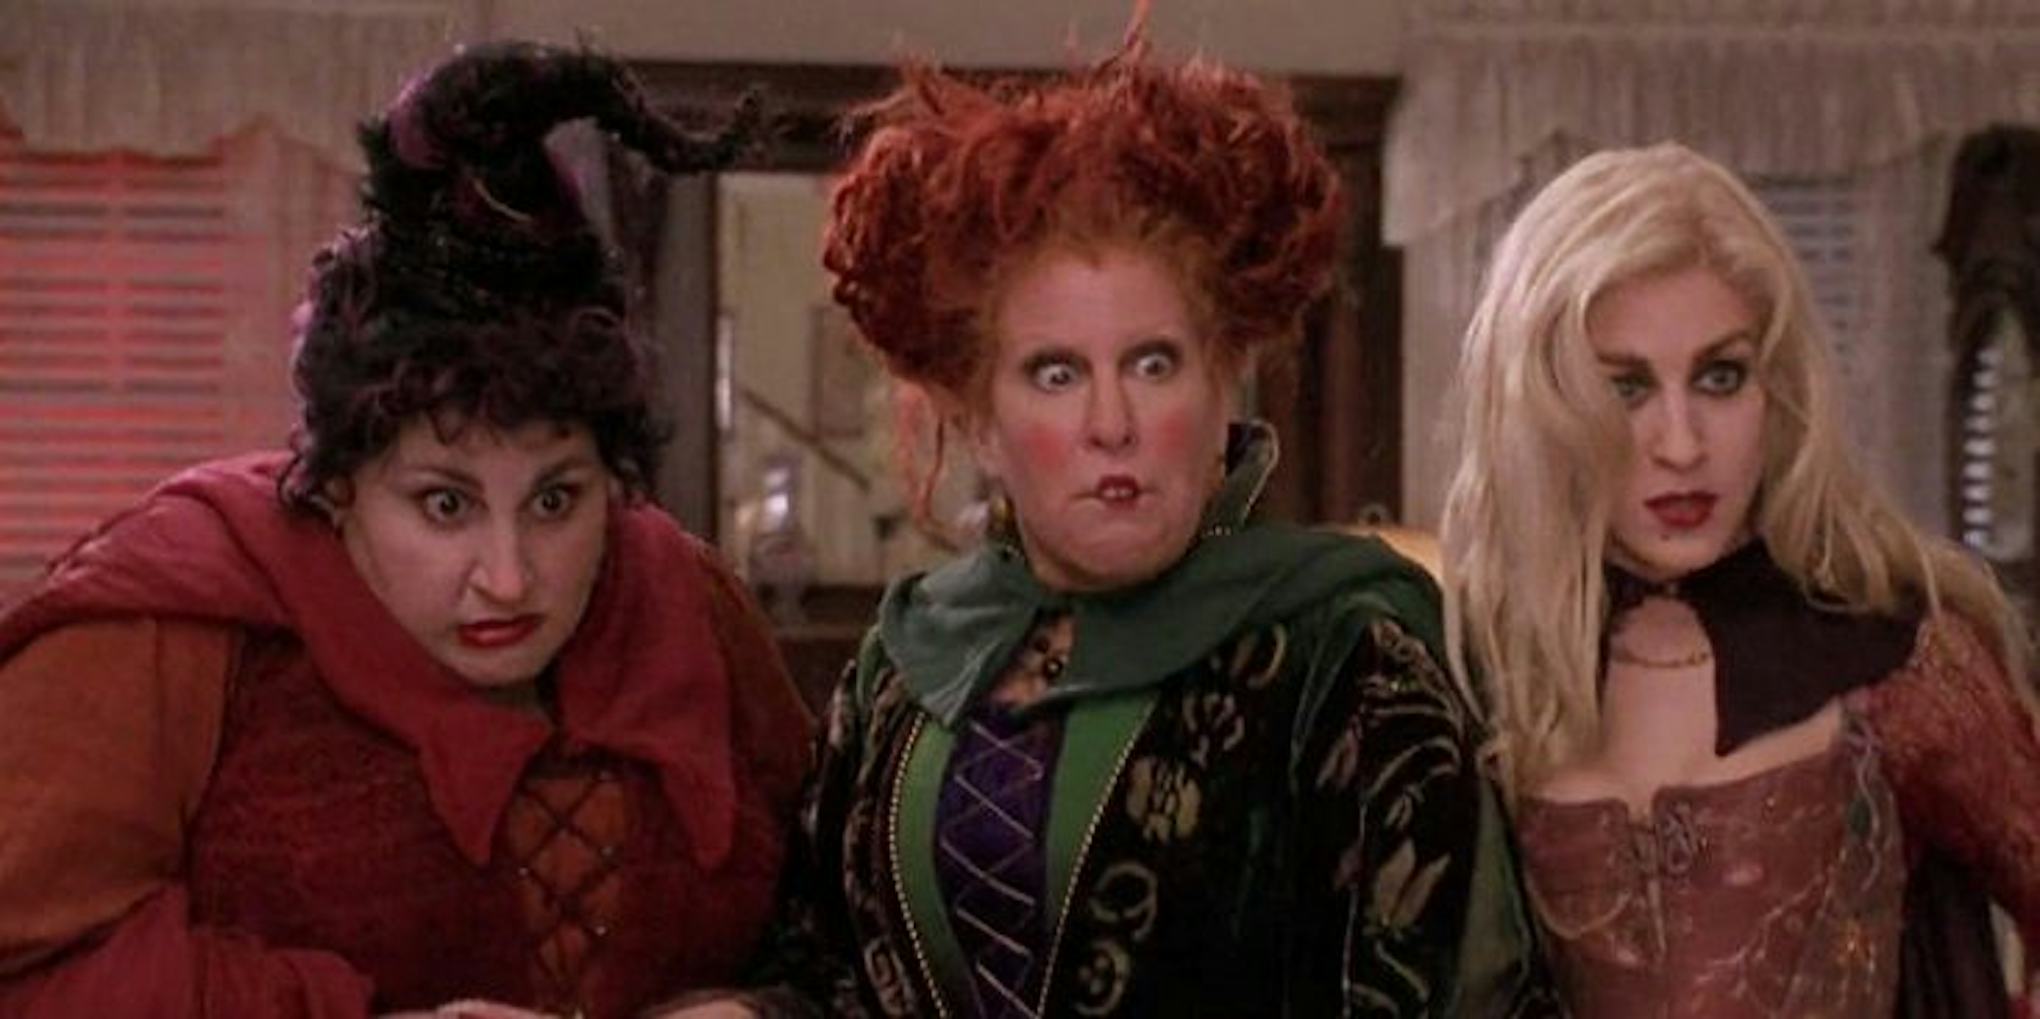 Hocus Pocus Beauty Products Are Here So Get Ready To Bewitch Some Babes